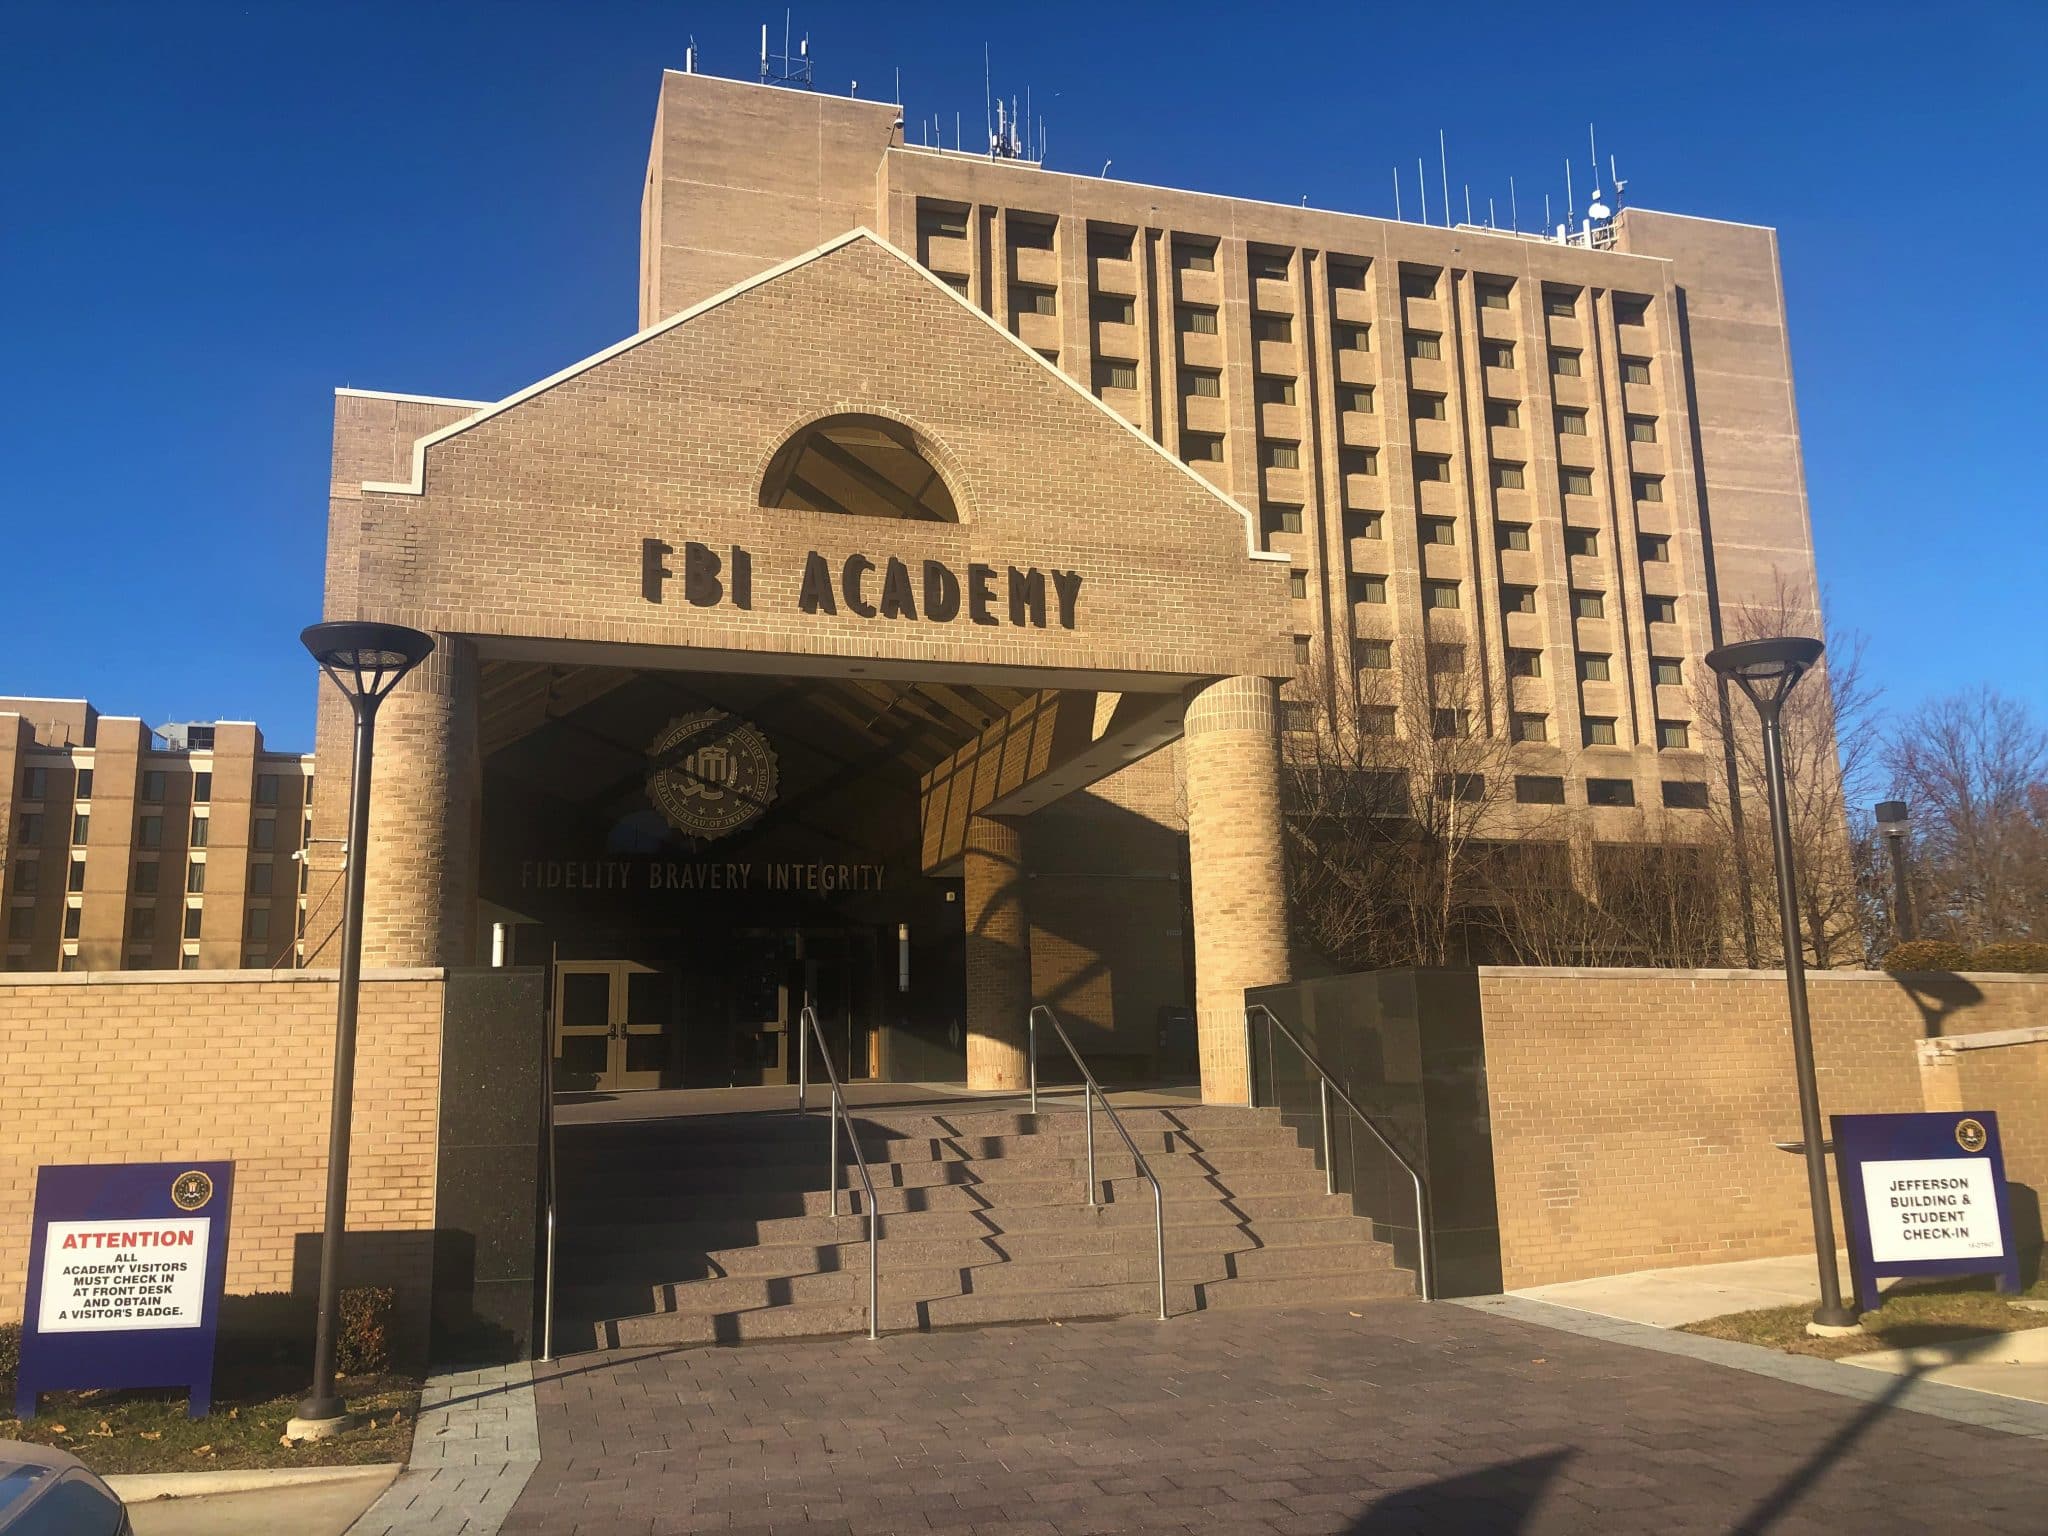 The FBI Academy: They Let Me Back On Campus! - Jerri Williams